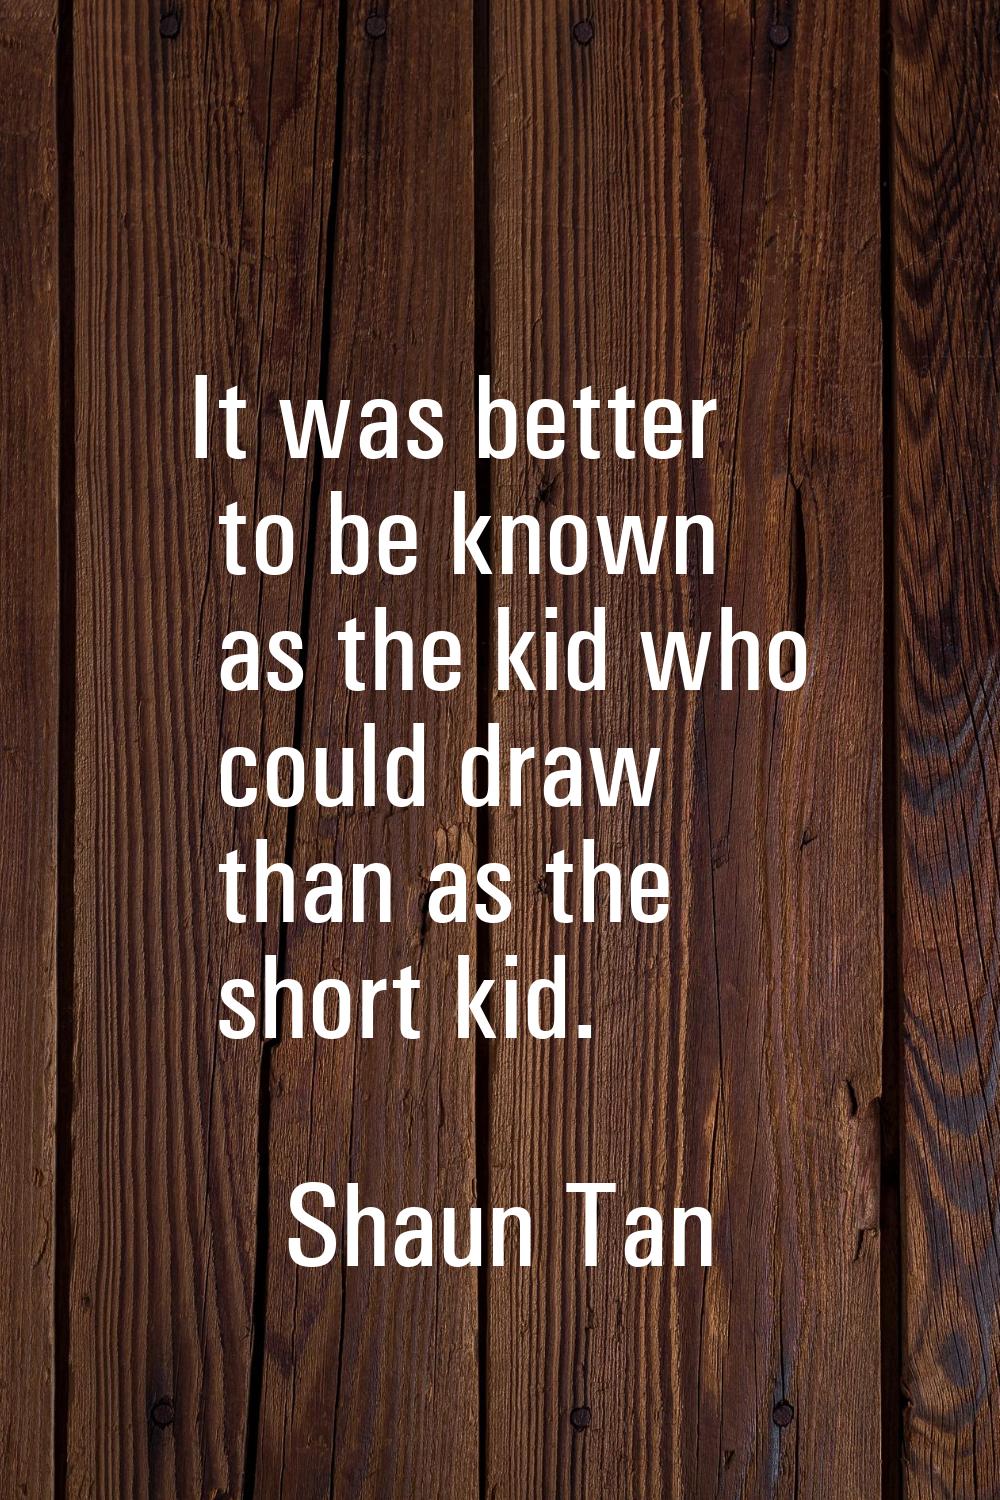 It was better to be known as the kid who could draw than as the short kid.